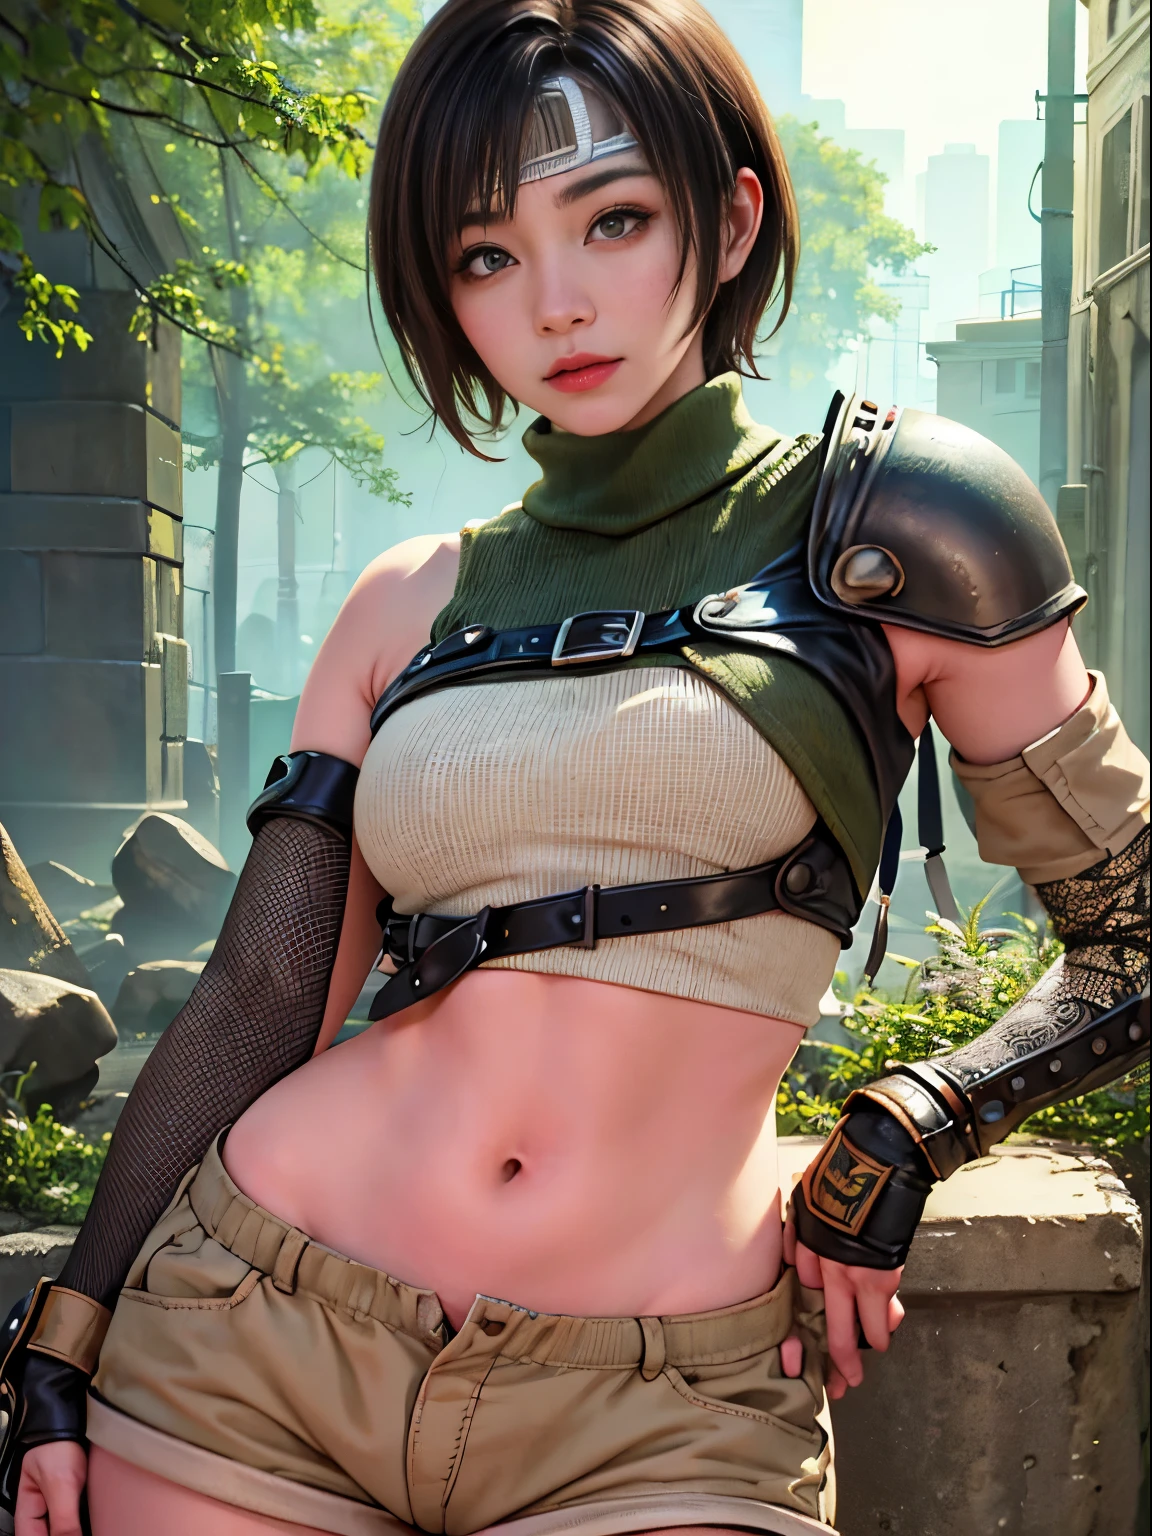 masterpiece, 最high quality:1.4), (1 girl), alone, (european youth:1), 1 girl, short hair, headband navel, No sleeve, turtleneck, brown eyes, No sleeveturtleneck, alone, chest, view viewer, sexy smile, mitt, crop top, brown hair, shorts, abdomen, armor, sweater, open fly, fingerless gloves, リブsweater, 中chests, Yuffie_Kisaragi_01, surreal girl, high detail skin, Digital single-lens reflex camera, soft lighting, high quality, highly detailed face, highly detailed skin, skin pores, Scattered beneath the surface, realistic pupils, 中chest, plump lips, detailed background, Depth of the bounds written, sharp focus, absurd, realistic proportions, excellent anatomy, (realistic, 超realistic:1.4), 16K HD,